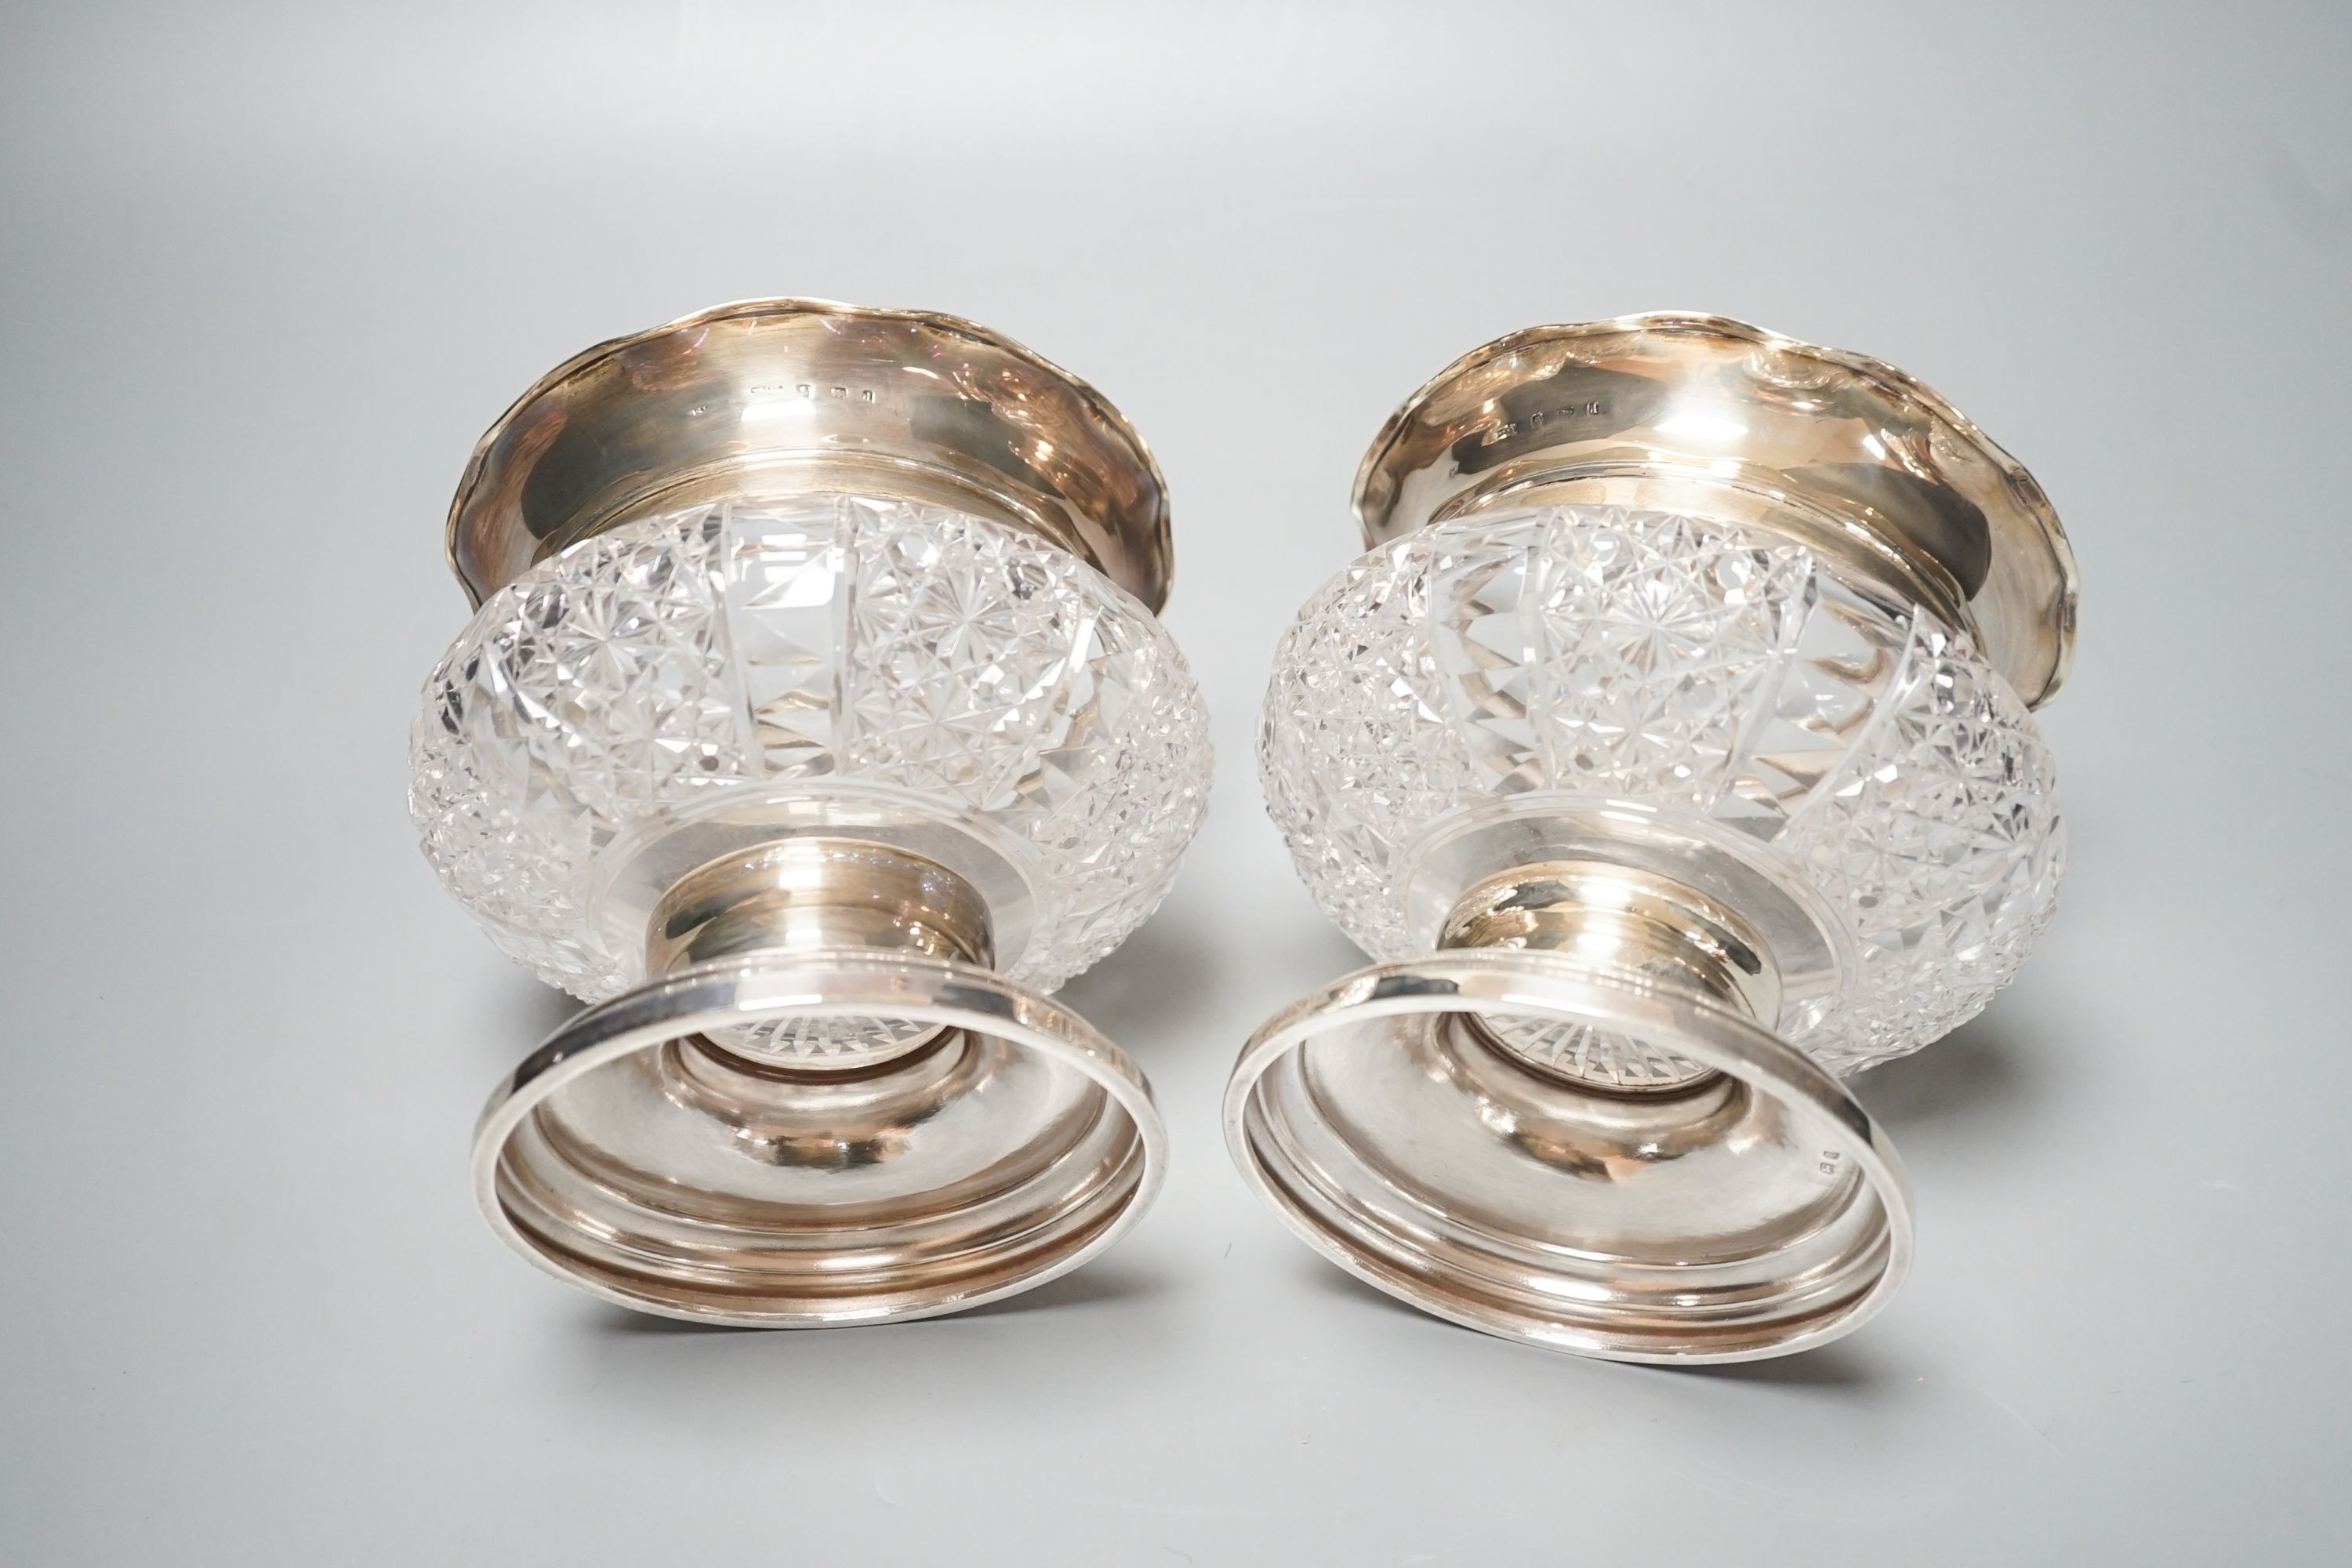 A pair of Edwardian silver mounted glass bowls, (lacking covers), Birmingham, 1904, height 13.4cm.